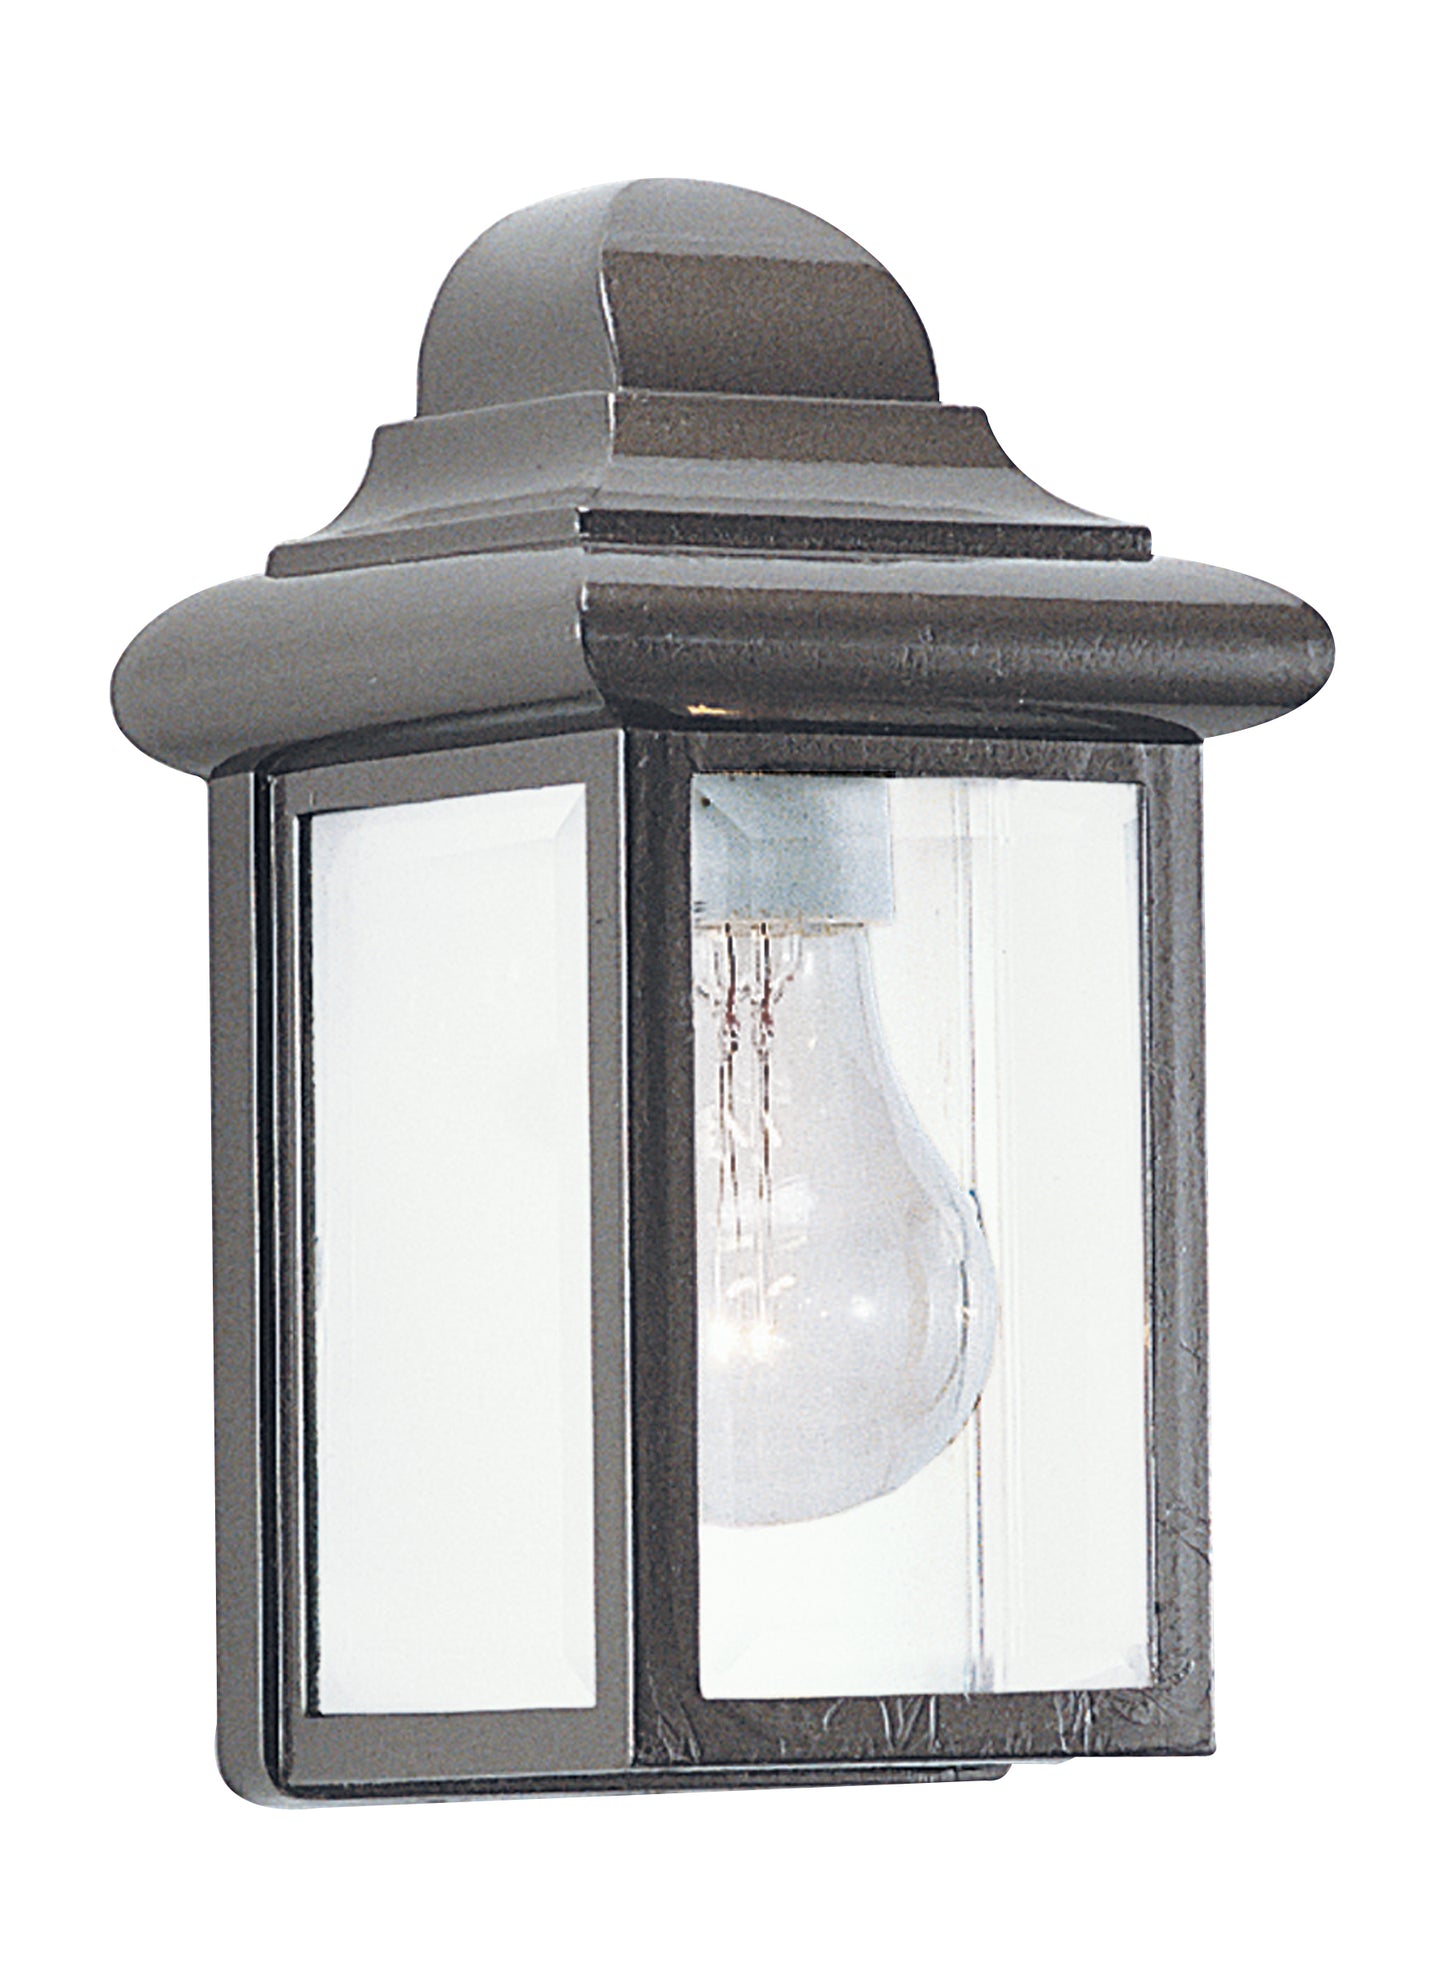 Mullberry Hill traditional 1-light outdoor exterior wall lantern sconce in bronze finish with clear beveled glass panels